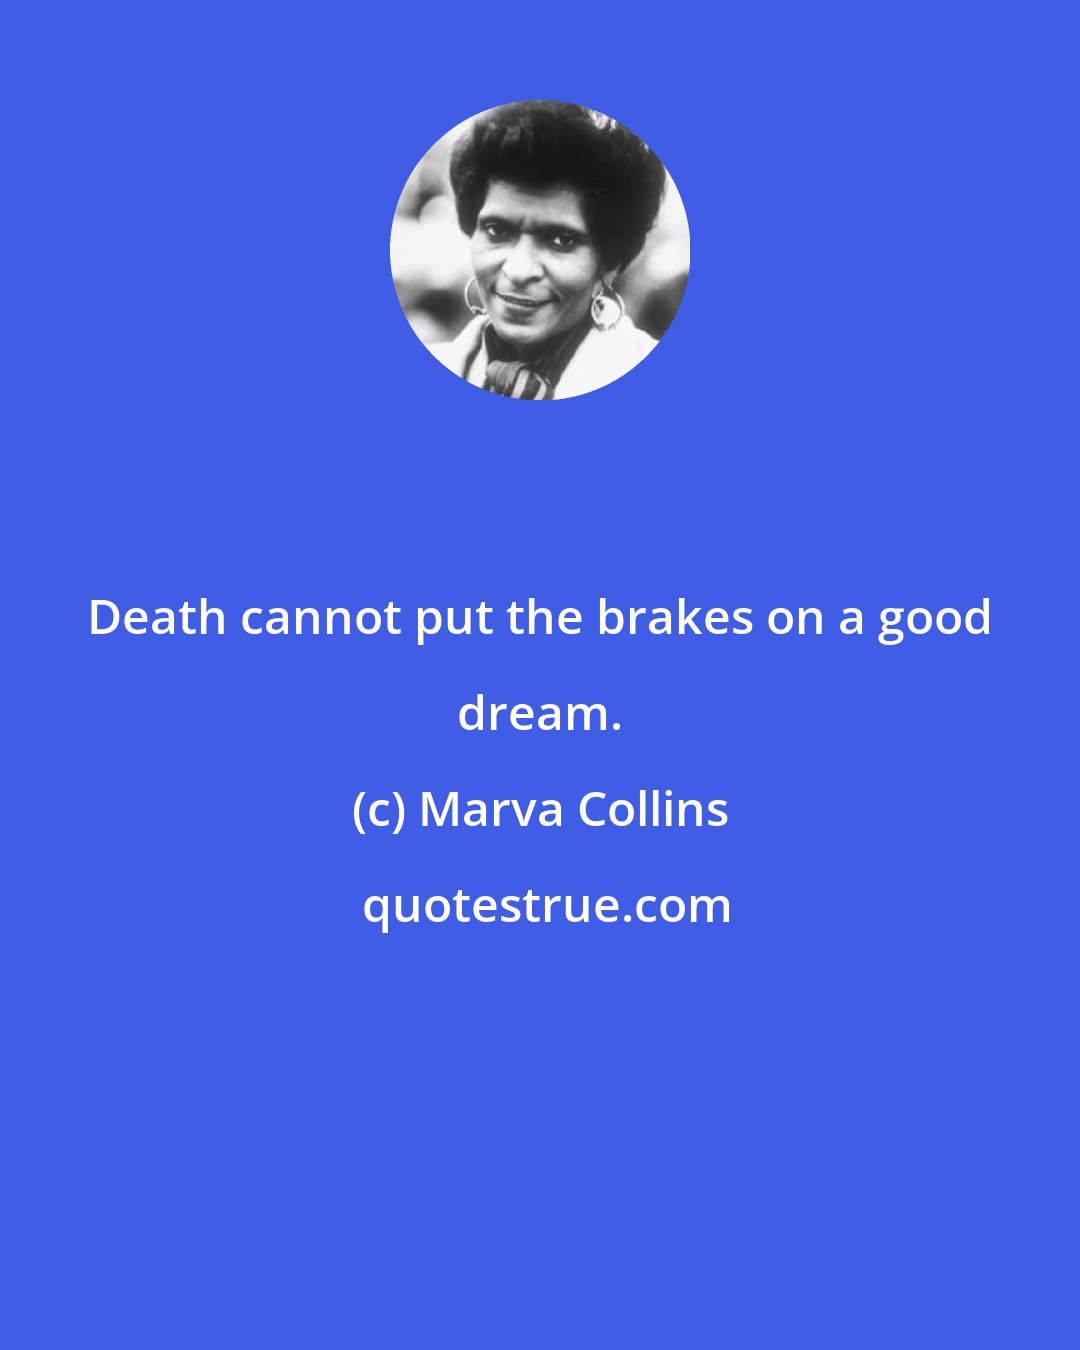 Marva Collins: Death cannot put the brakes on a good dream.